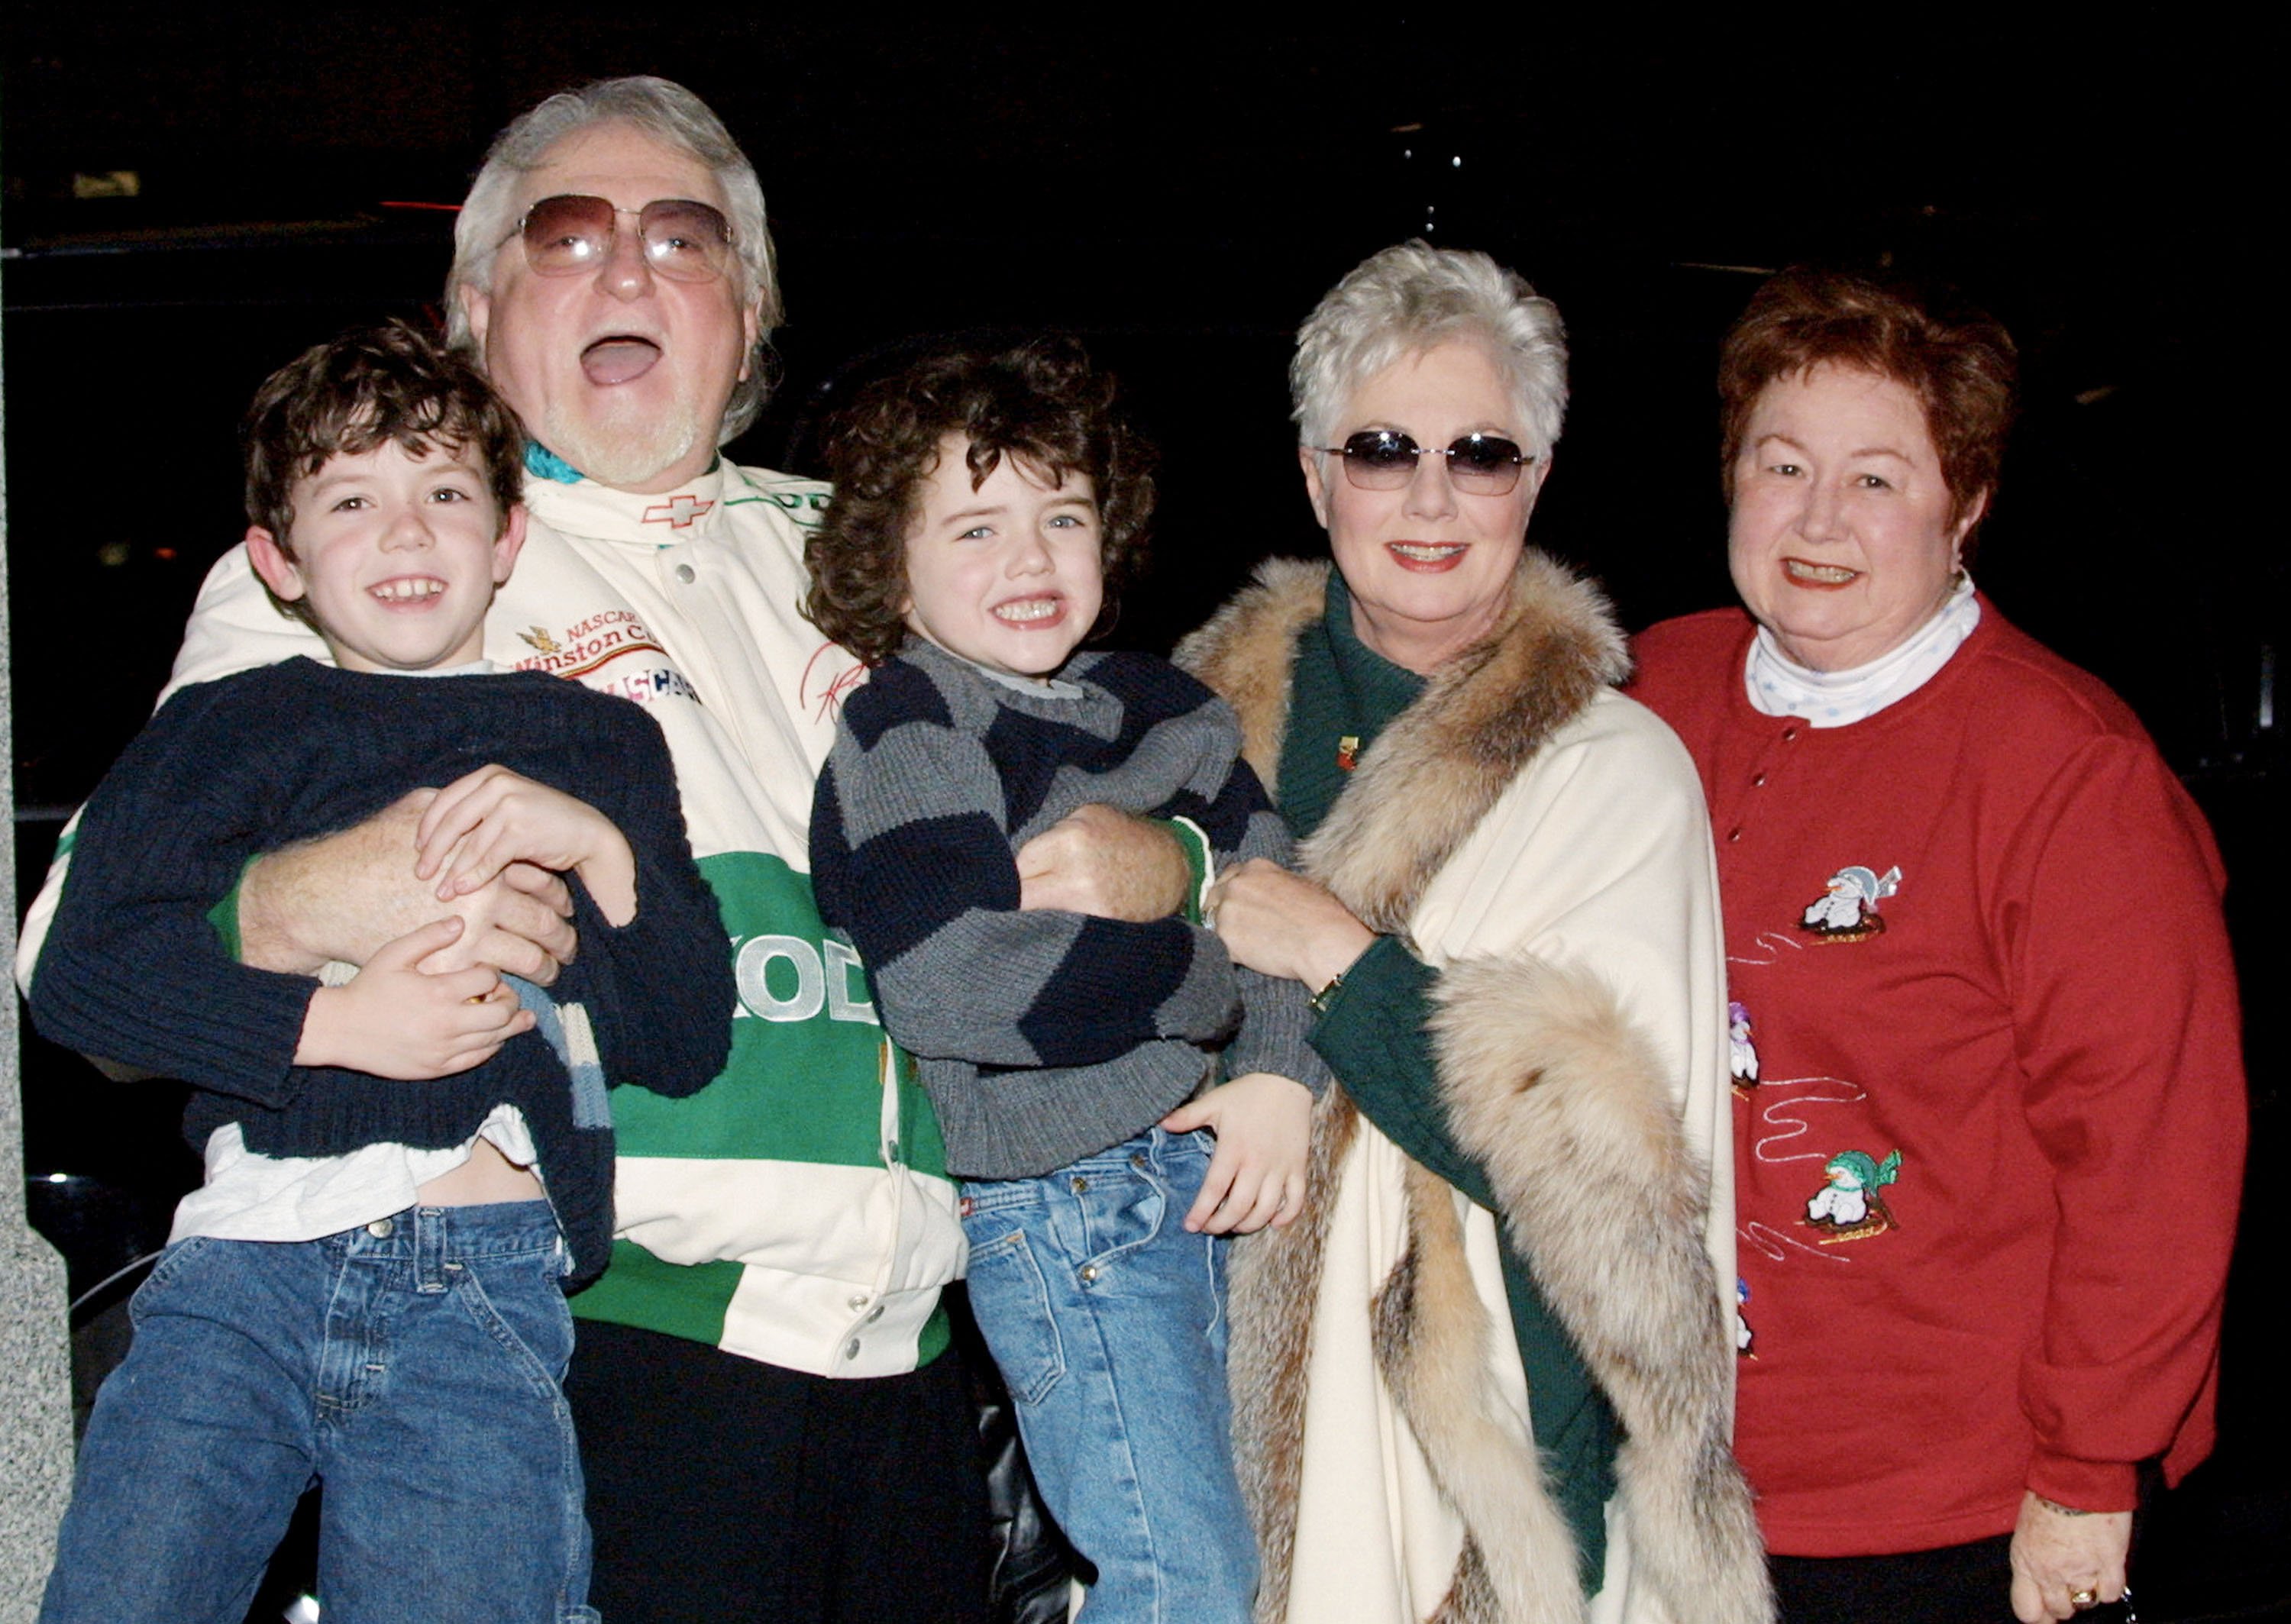 Marty Ingels, Shirley Jones, their housekeeper, and grandchildren at the premiere screening of "The Adventures of Scooter McDougal" on December 22, 2002, in Encino, California. | Source: Frederick M. Brown/Getty Images